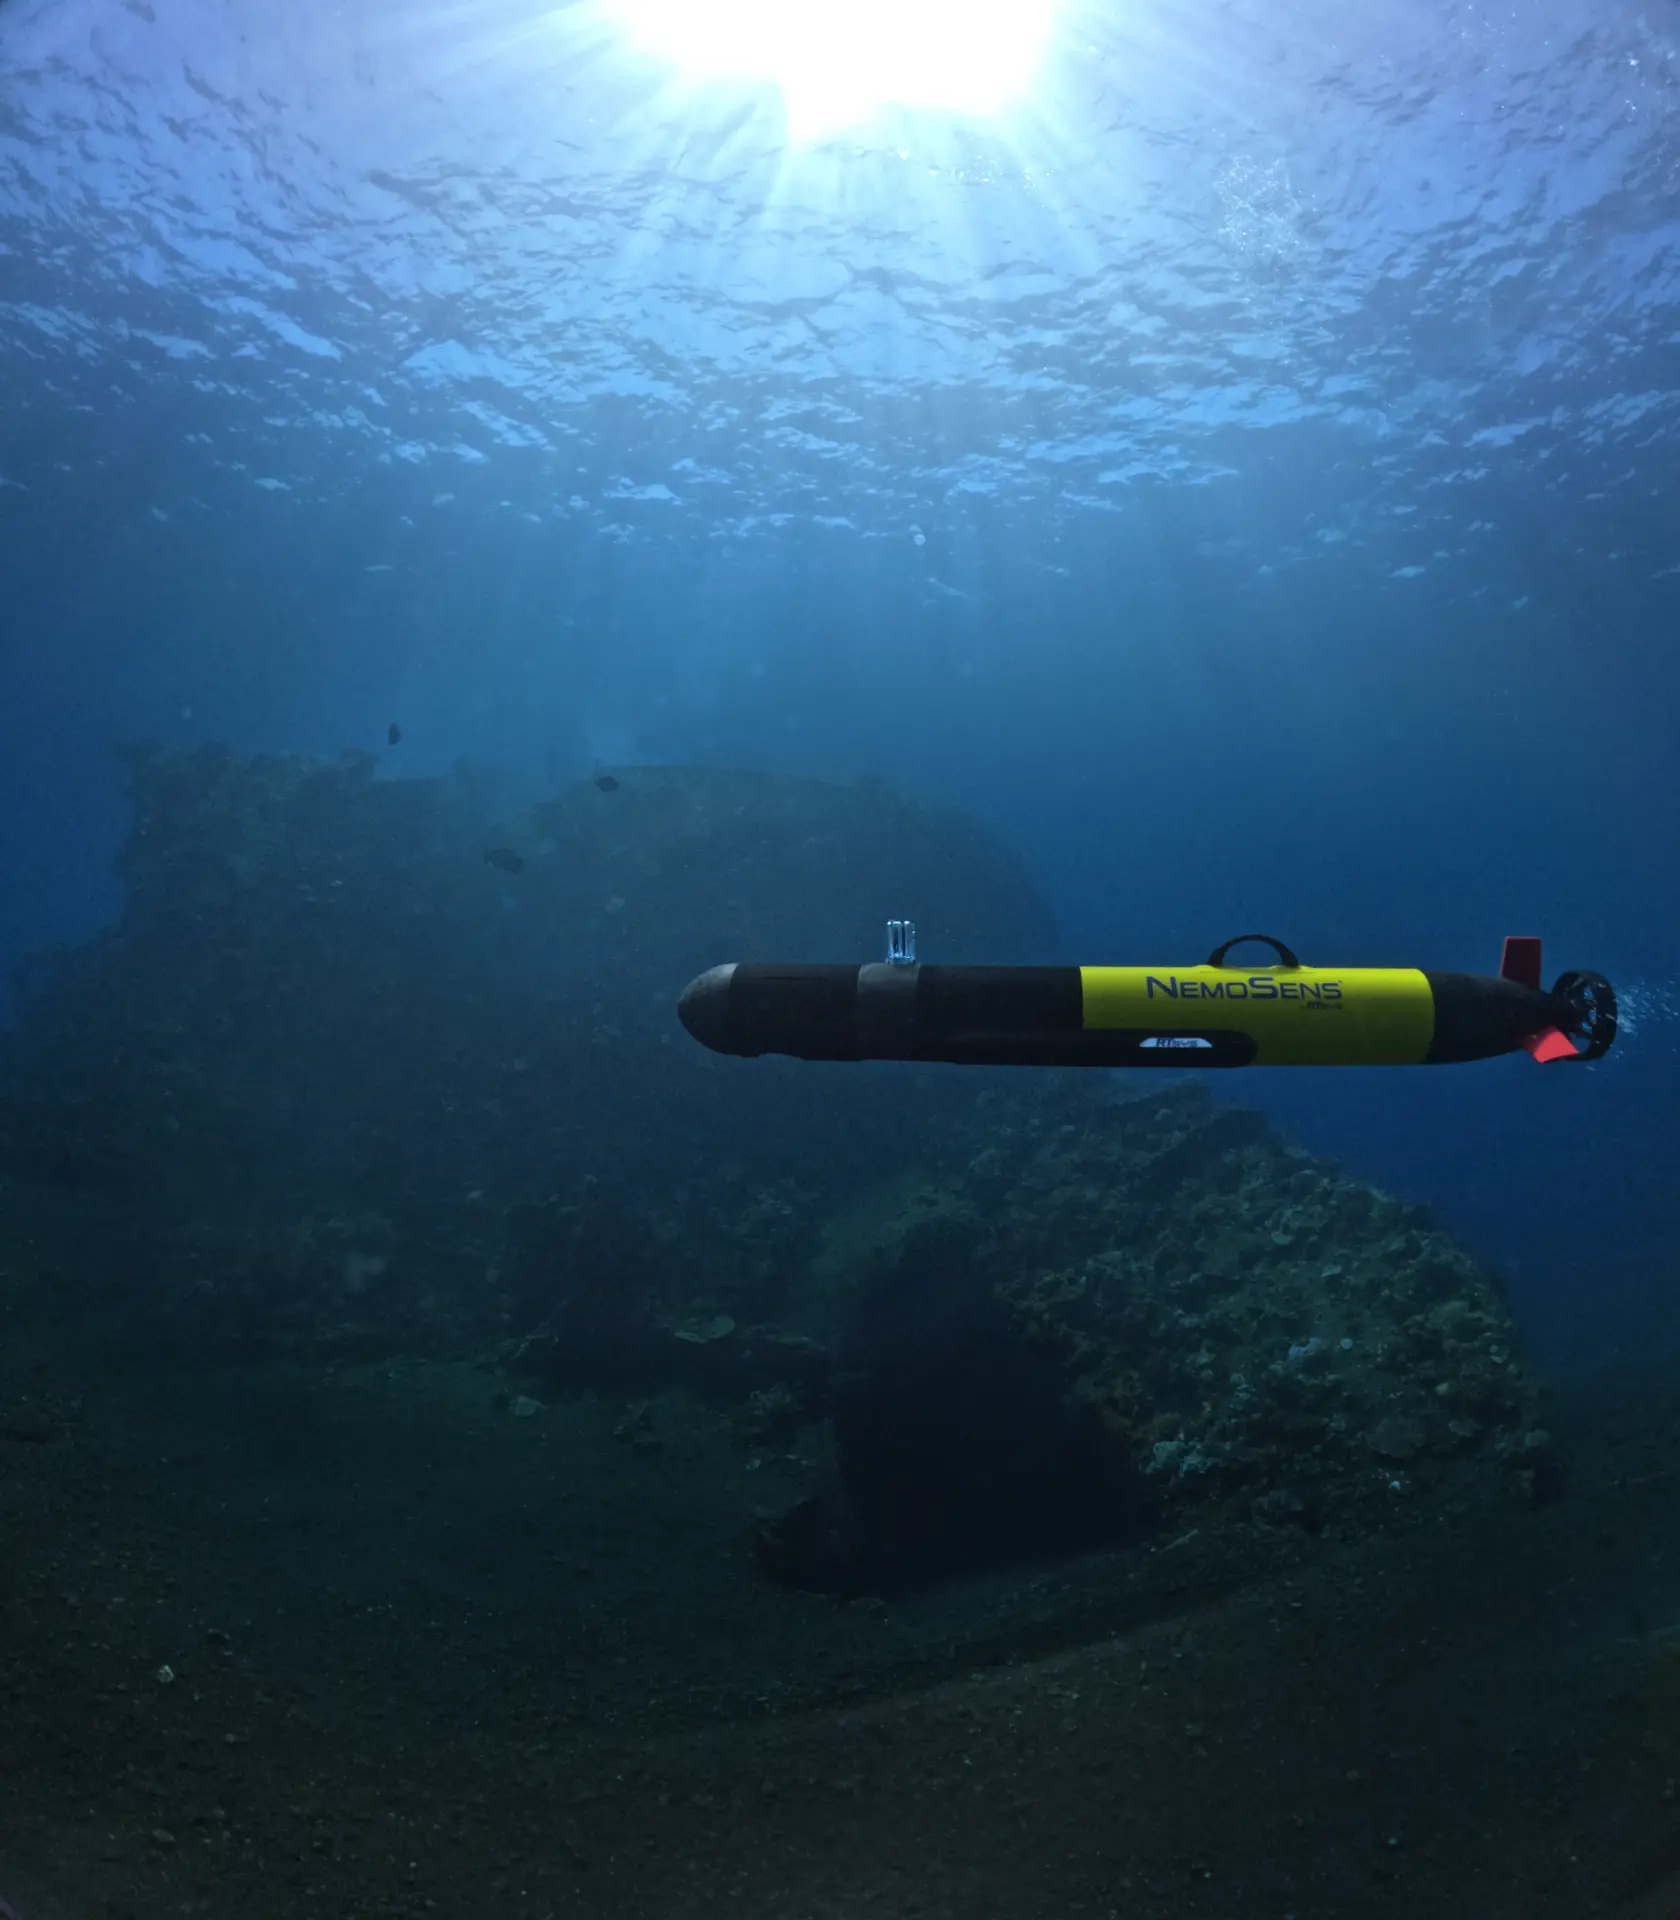 The NemoSens AUV on a mission underwater